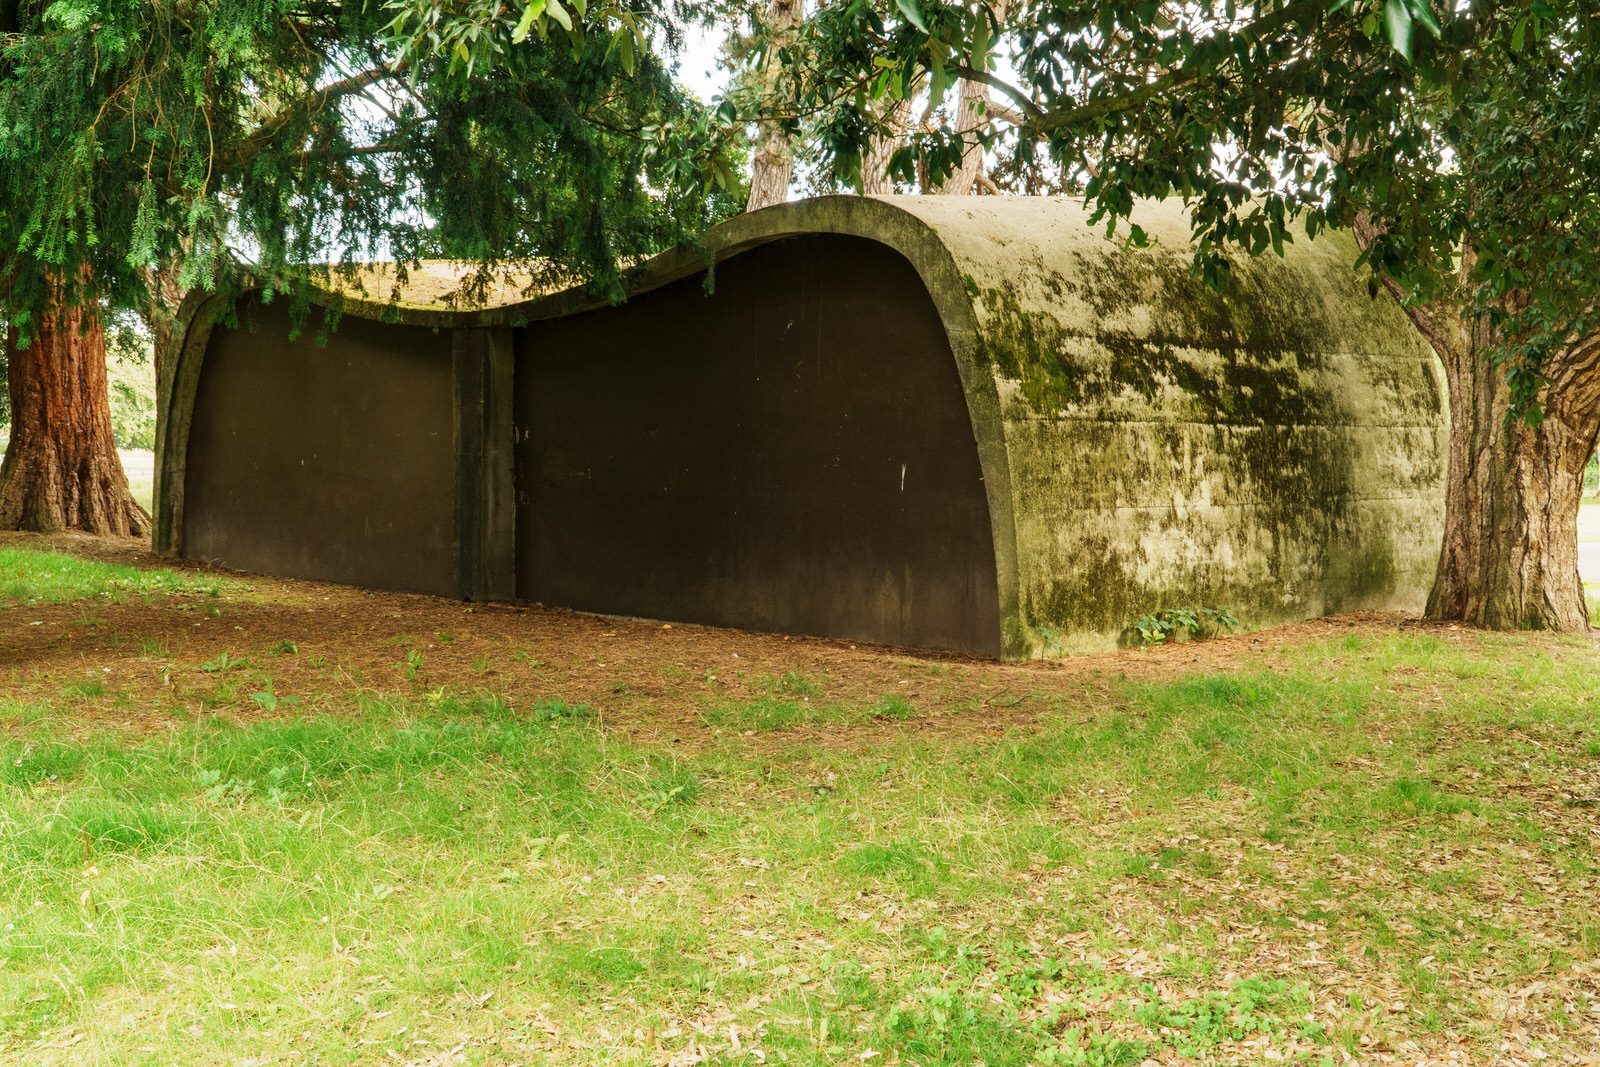 THE CONCRETE SHELTER IN PHOENIX PARK [LOCATED IN THE PEOPLE'S FLOWER GARDENS] 005